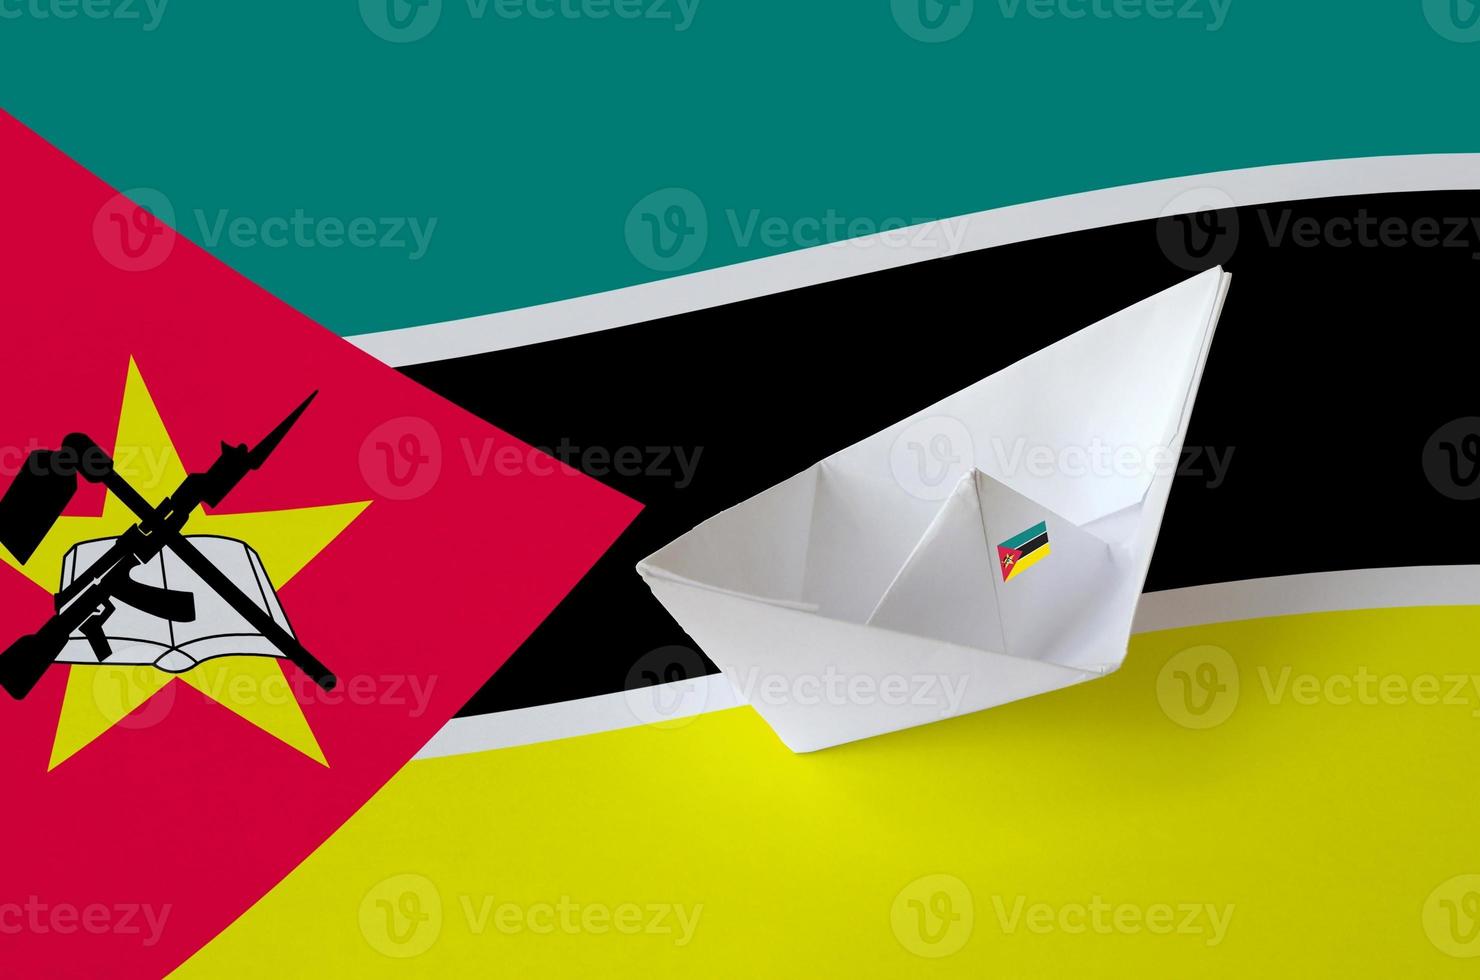 Mozambique flag depicted on paper origami ship closeup. Handmade arts concept photo